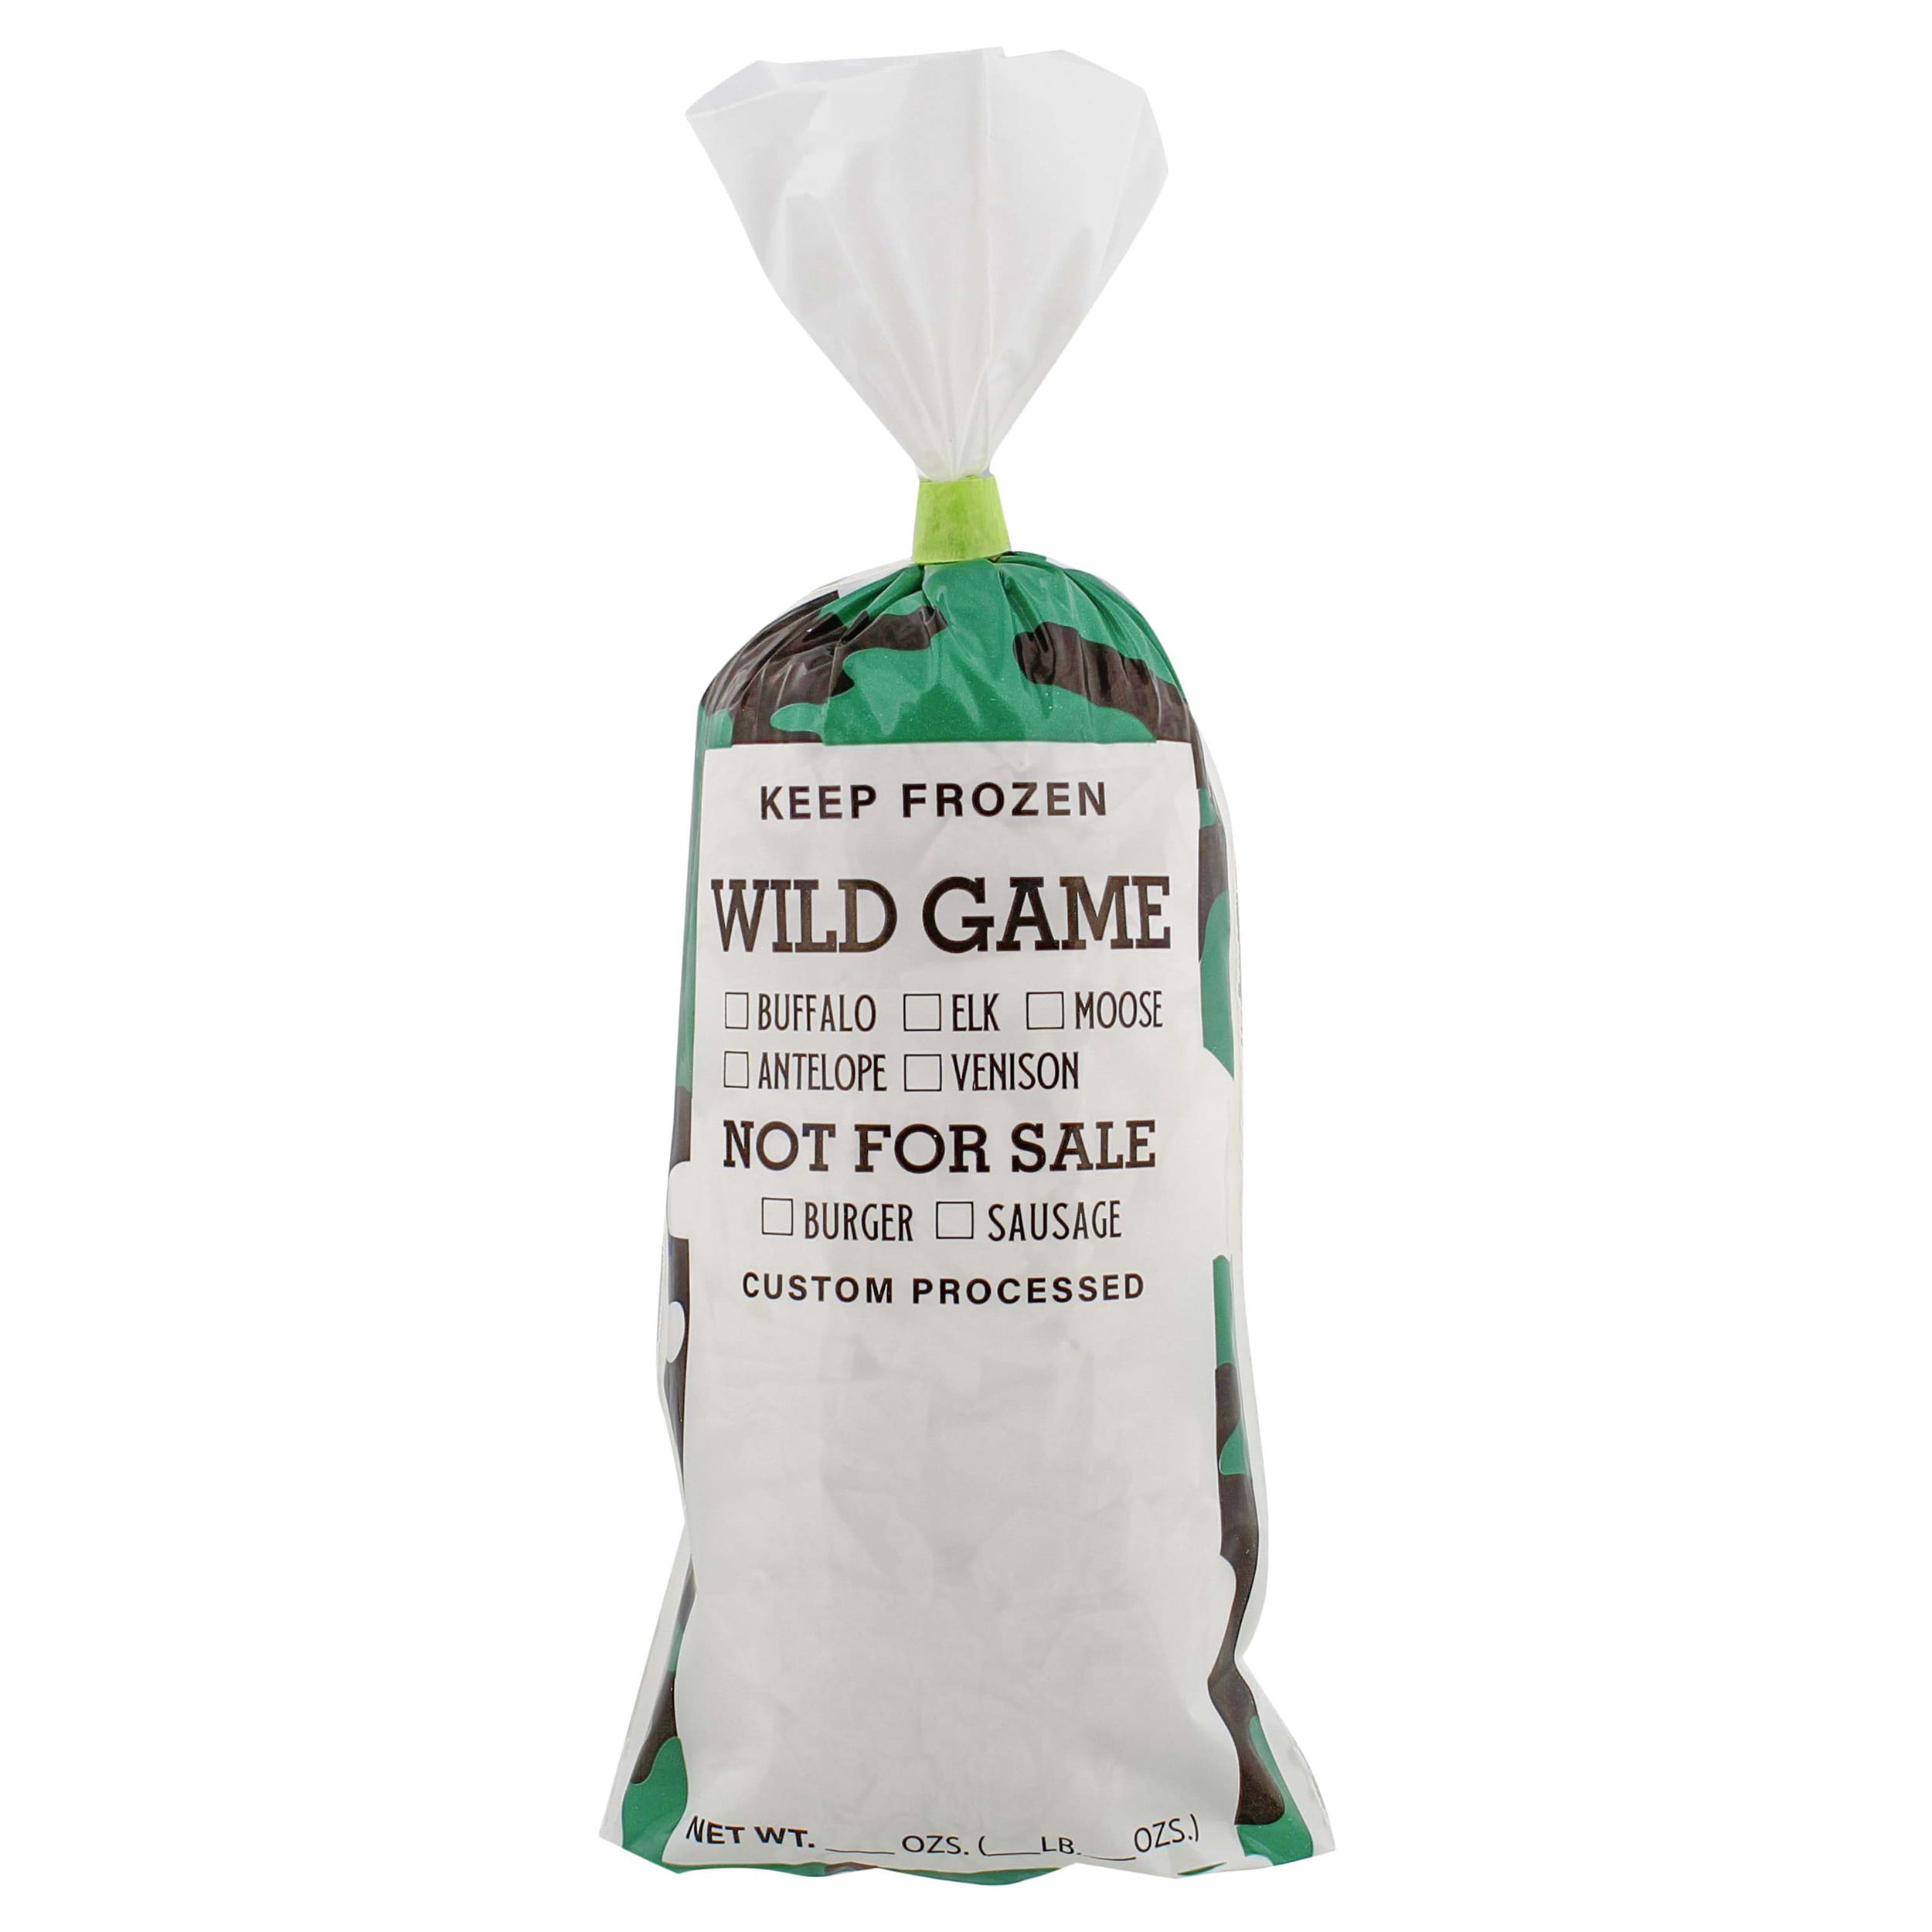 140 Pack Wild Game Meat Bags for Freezer, 1 Lb Ground Meat Bags, Wild Game  Meat Bags to Protect Your Meat from Freezer Burn